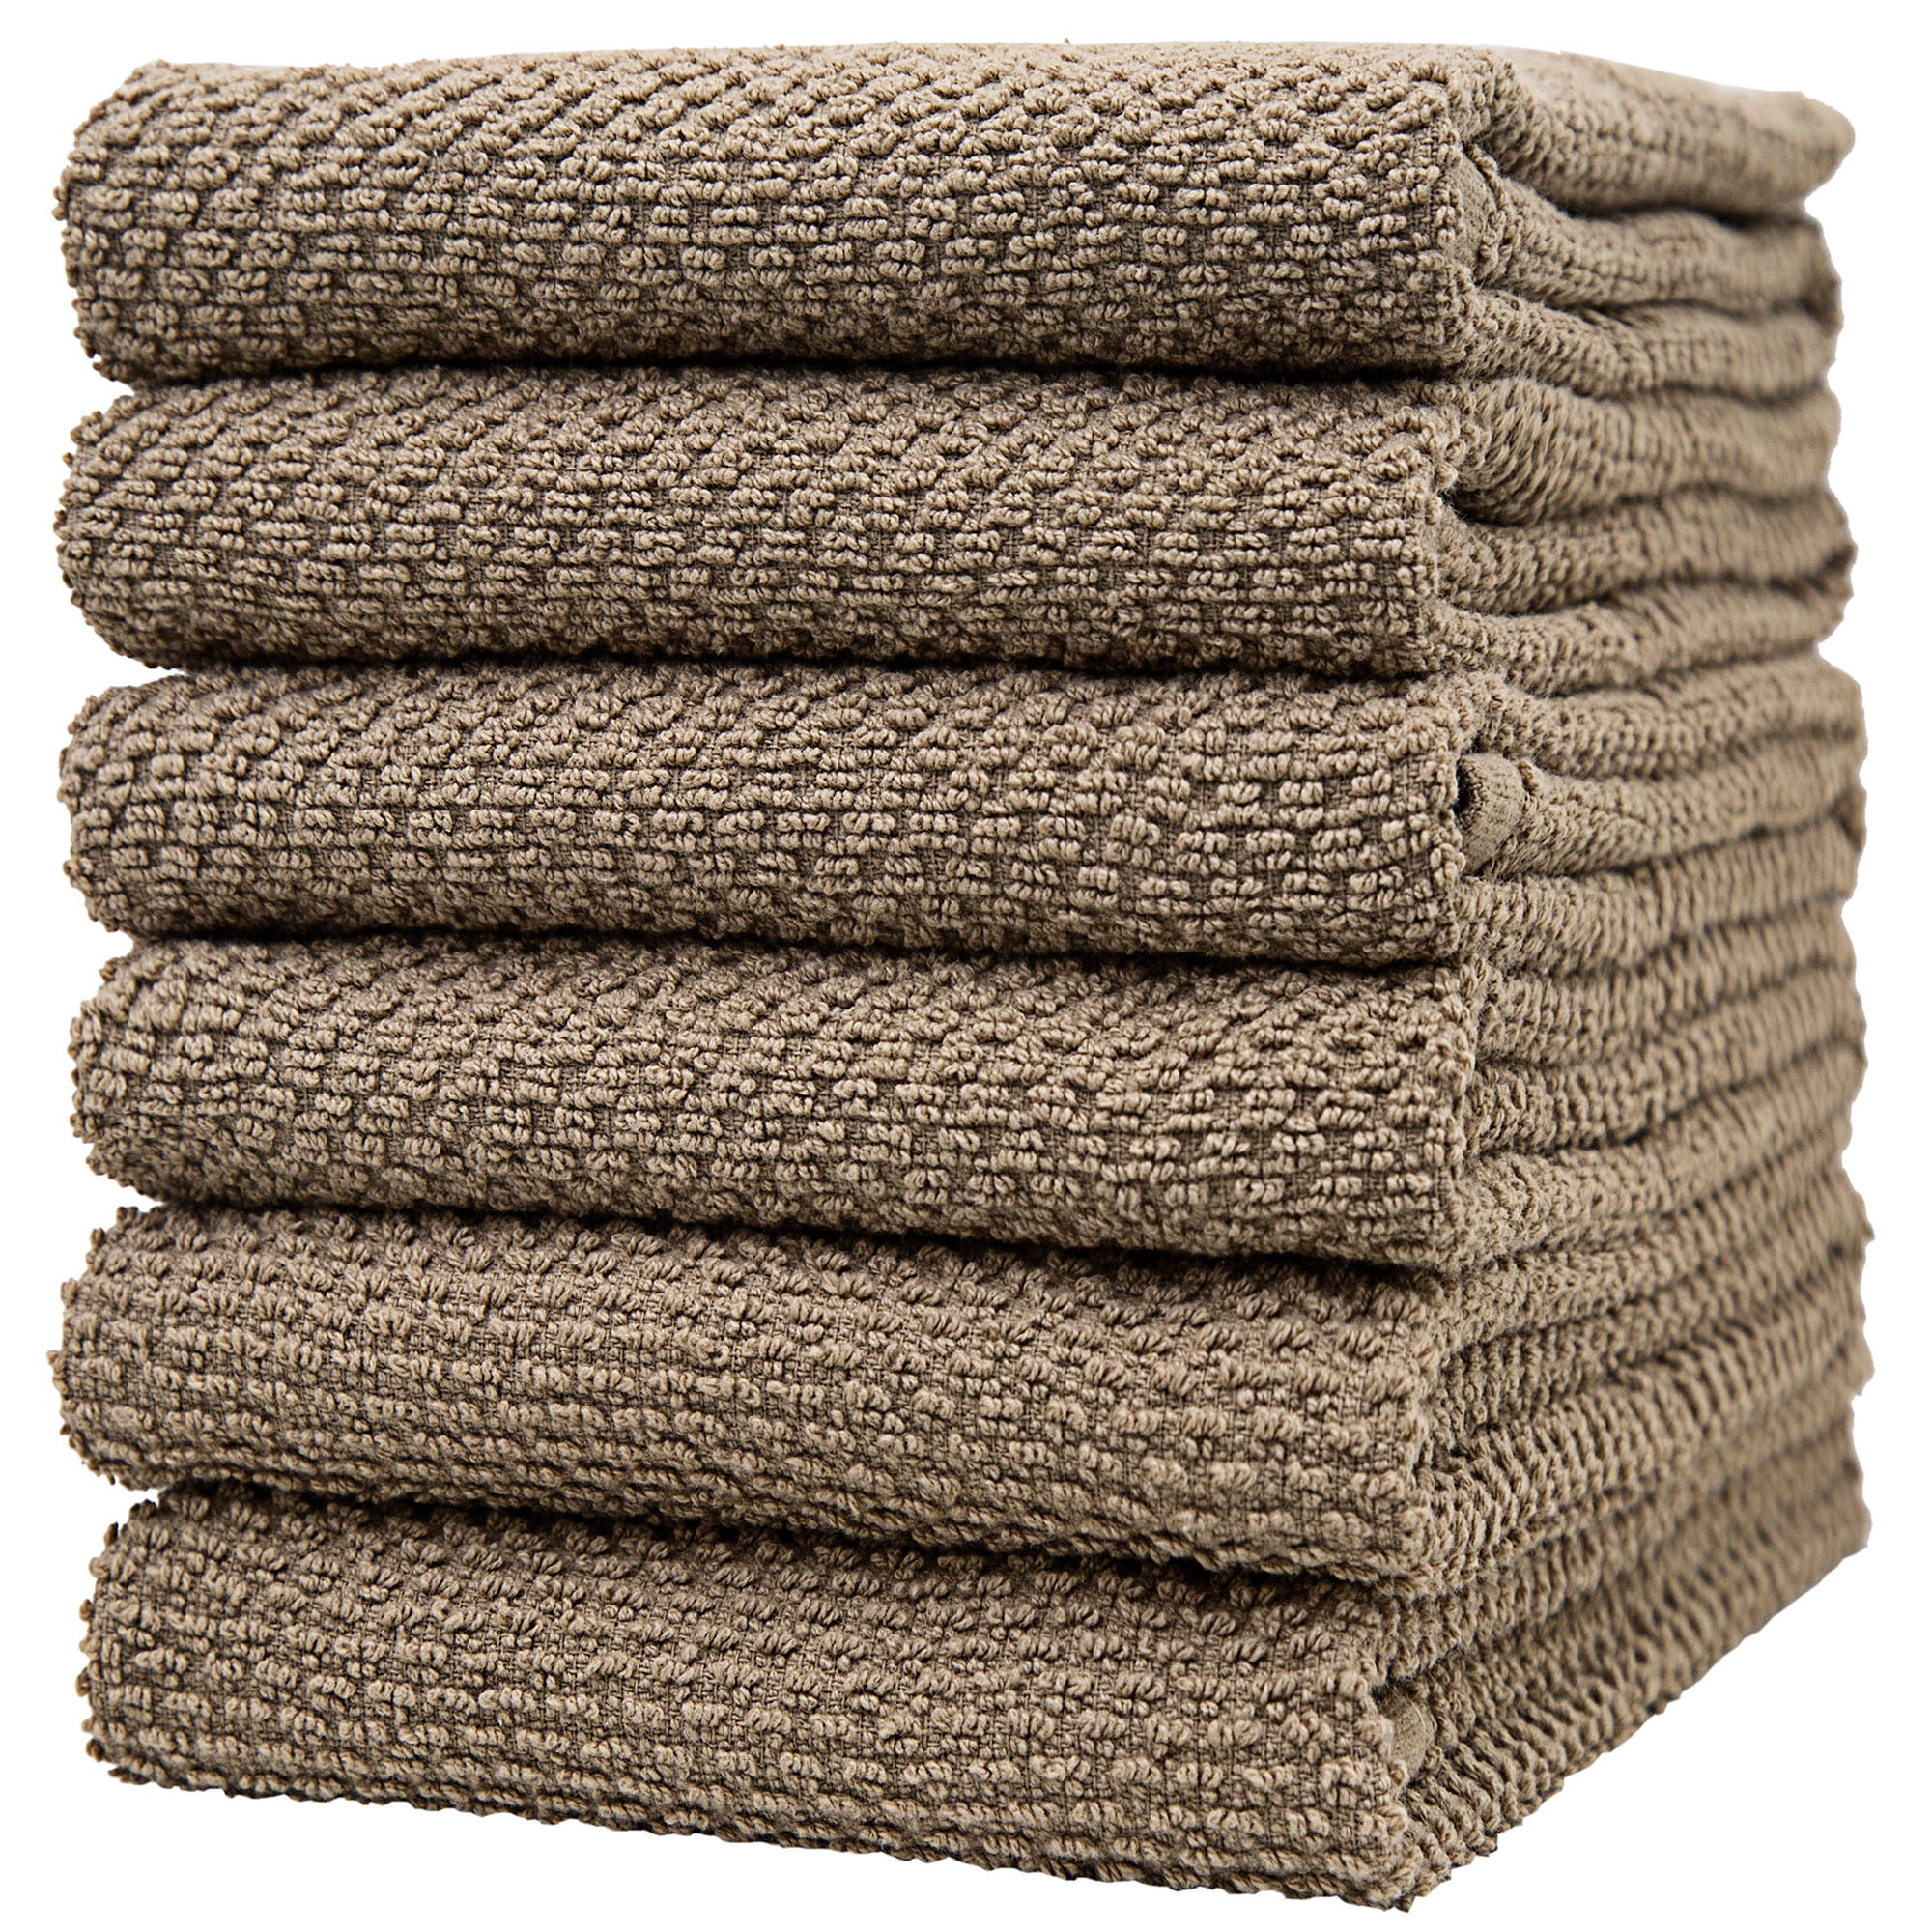 Premium Extra Large Kitchen Towels (16 X 28 Inch) - Popcorn Weave (12 Pack)  Dish